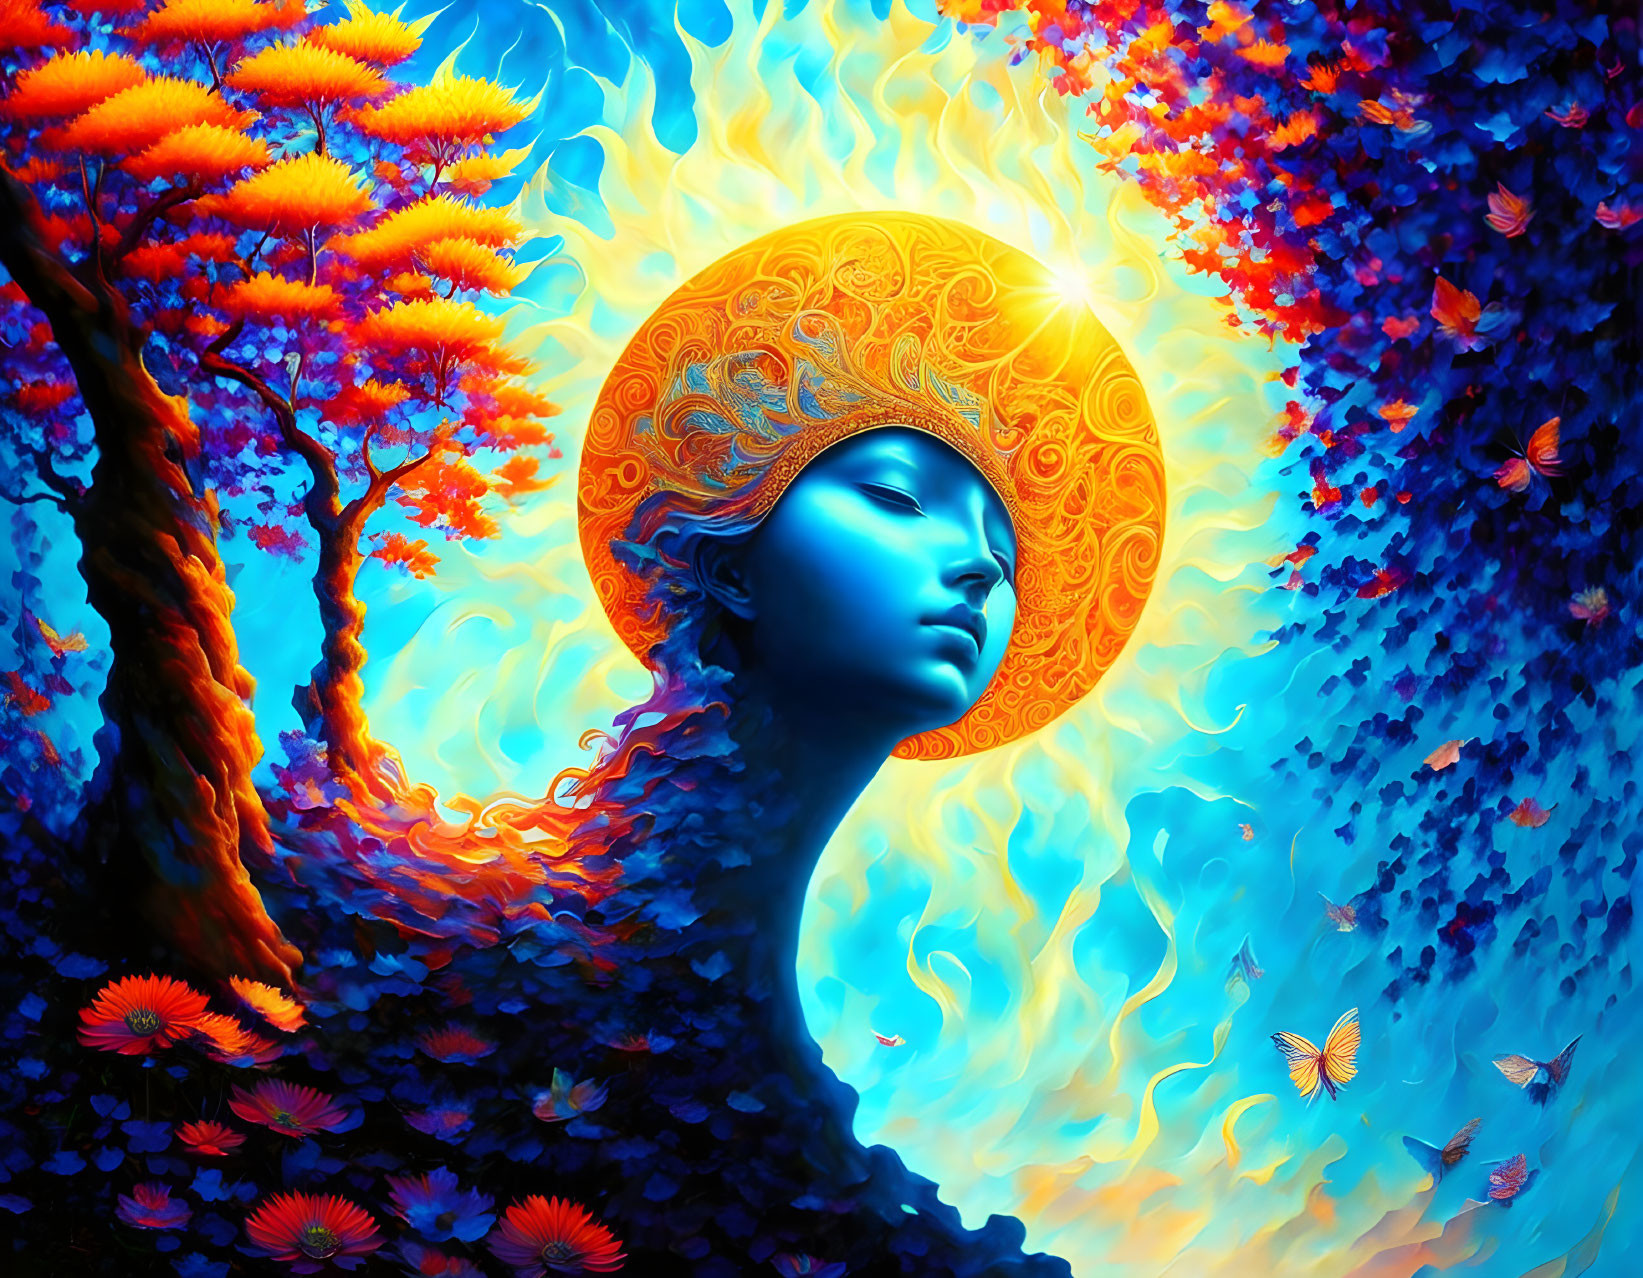 Colorful Artwork: Blue-faced Figure with Sun Halo, Autumn Trees, Butterflies